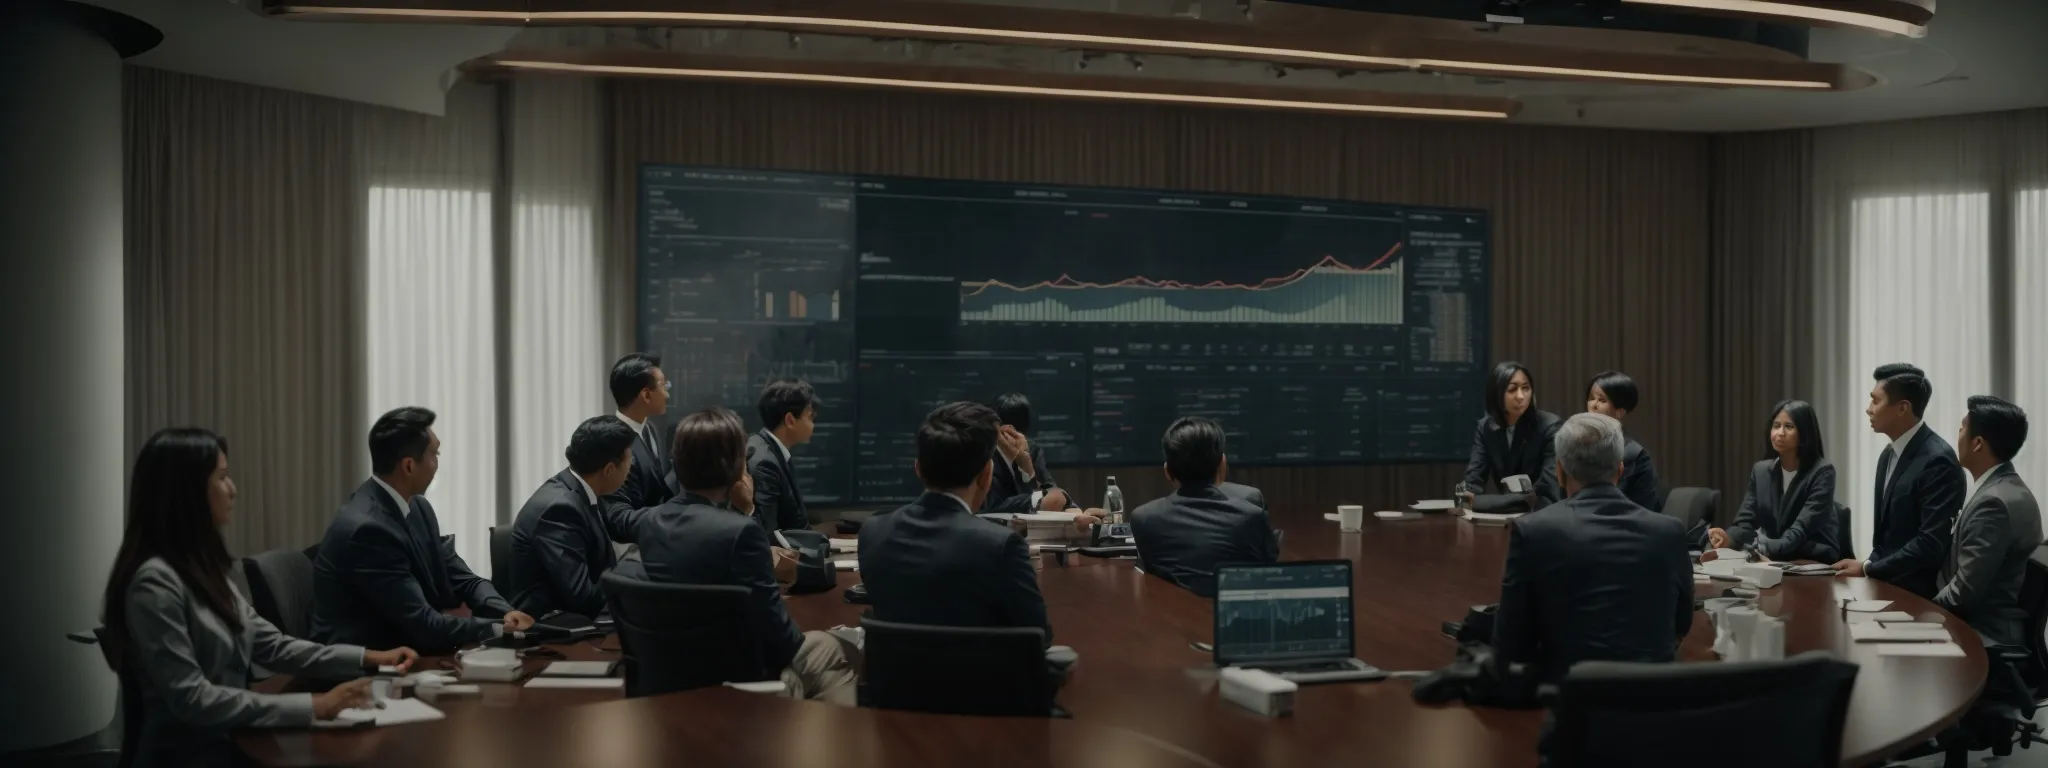 a group of people sitting around a conference table, animatedly discussing charts displayed on a large screen, reflecting a focus on data analysis and strategy.